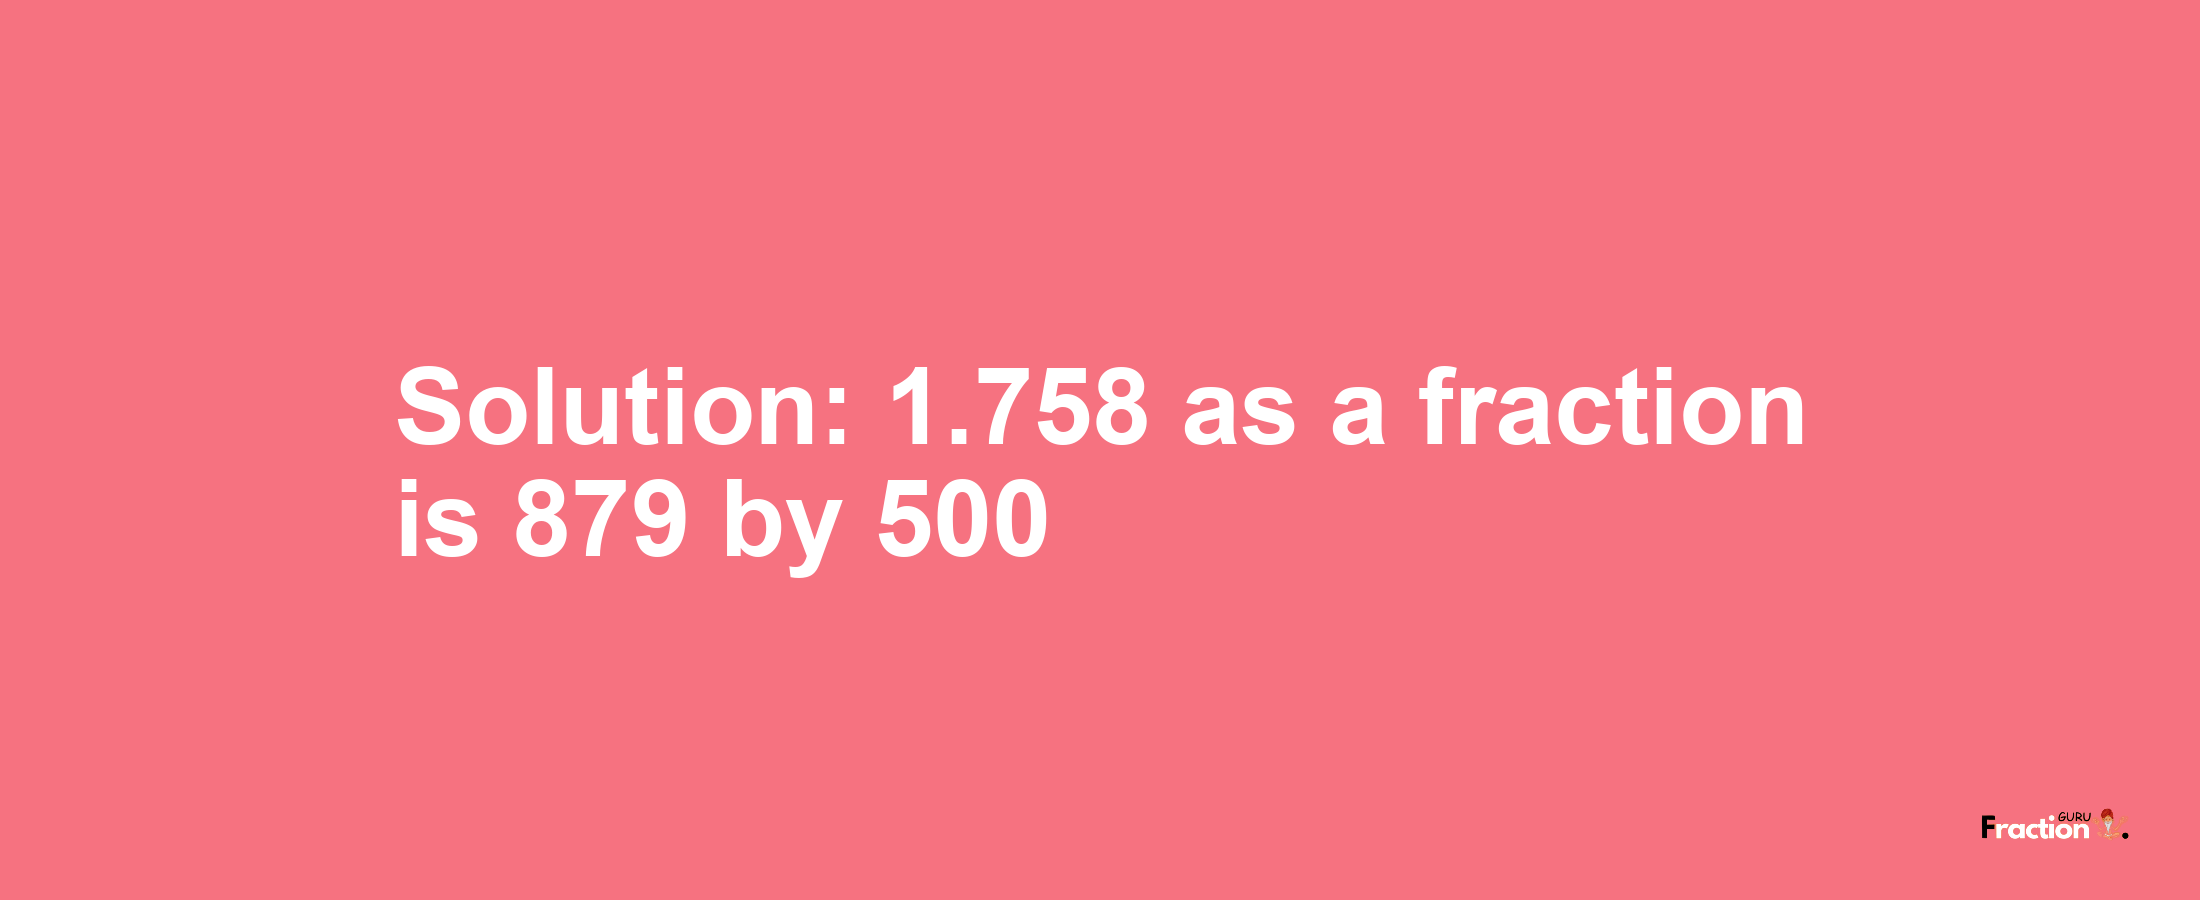 Solution:1.758 as a fraction is 879/500